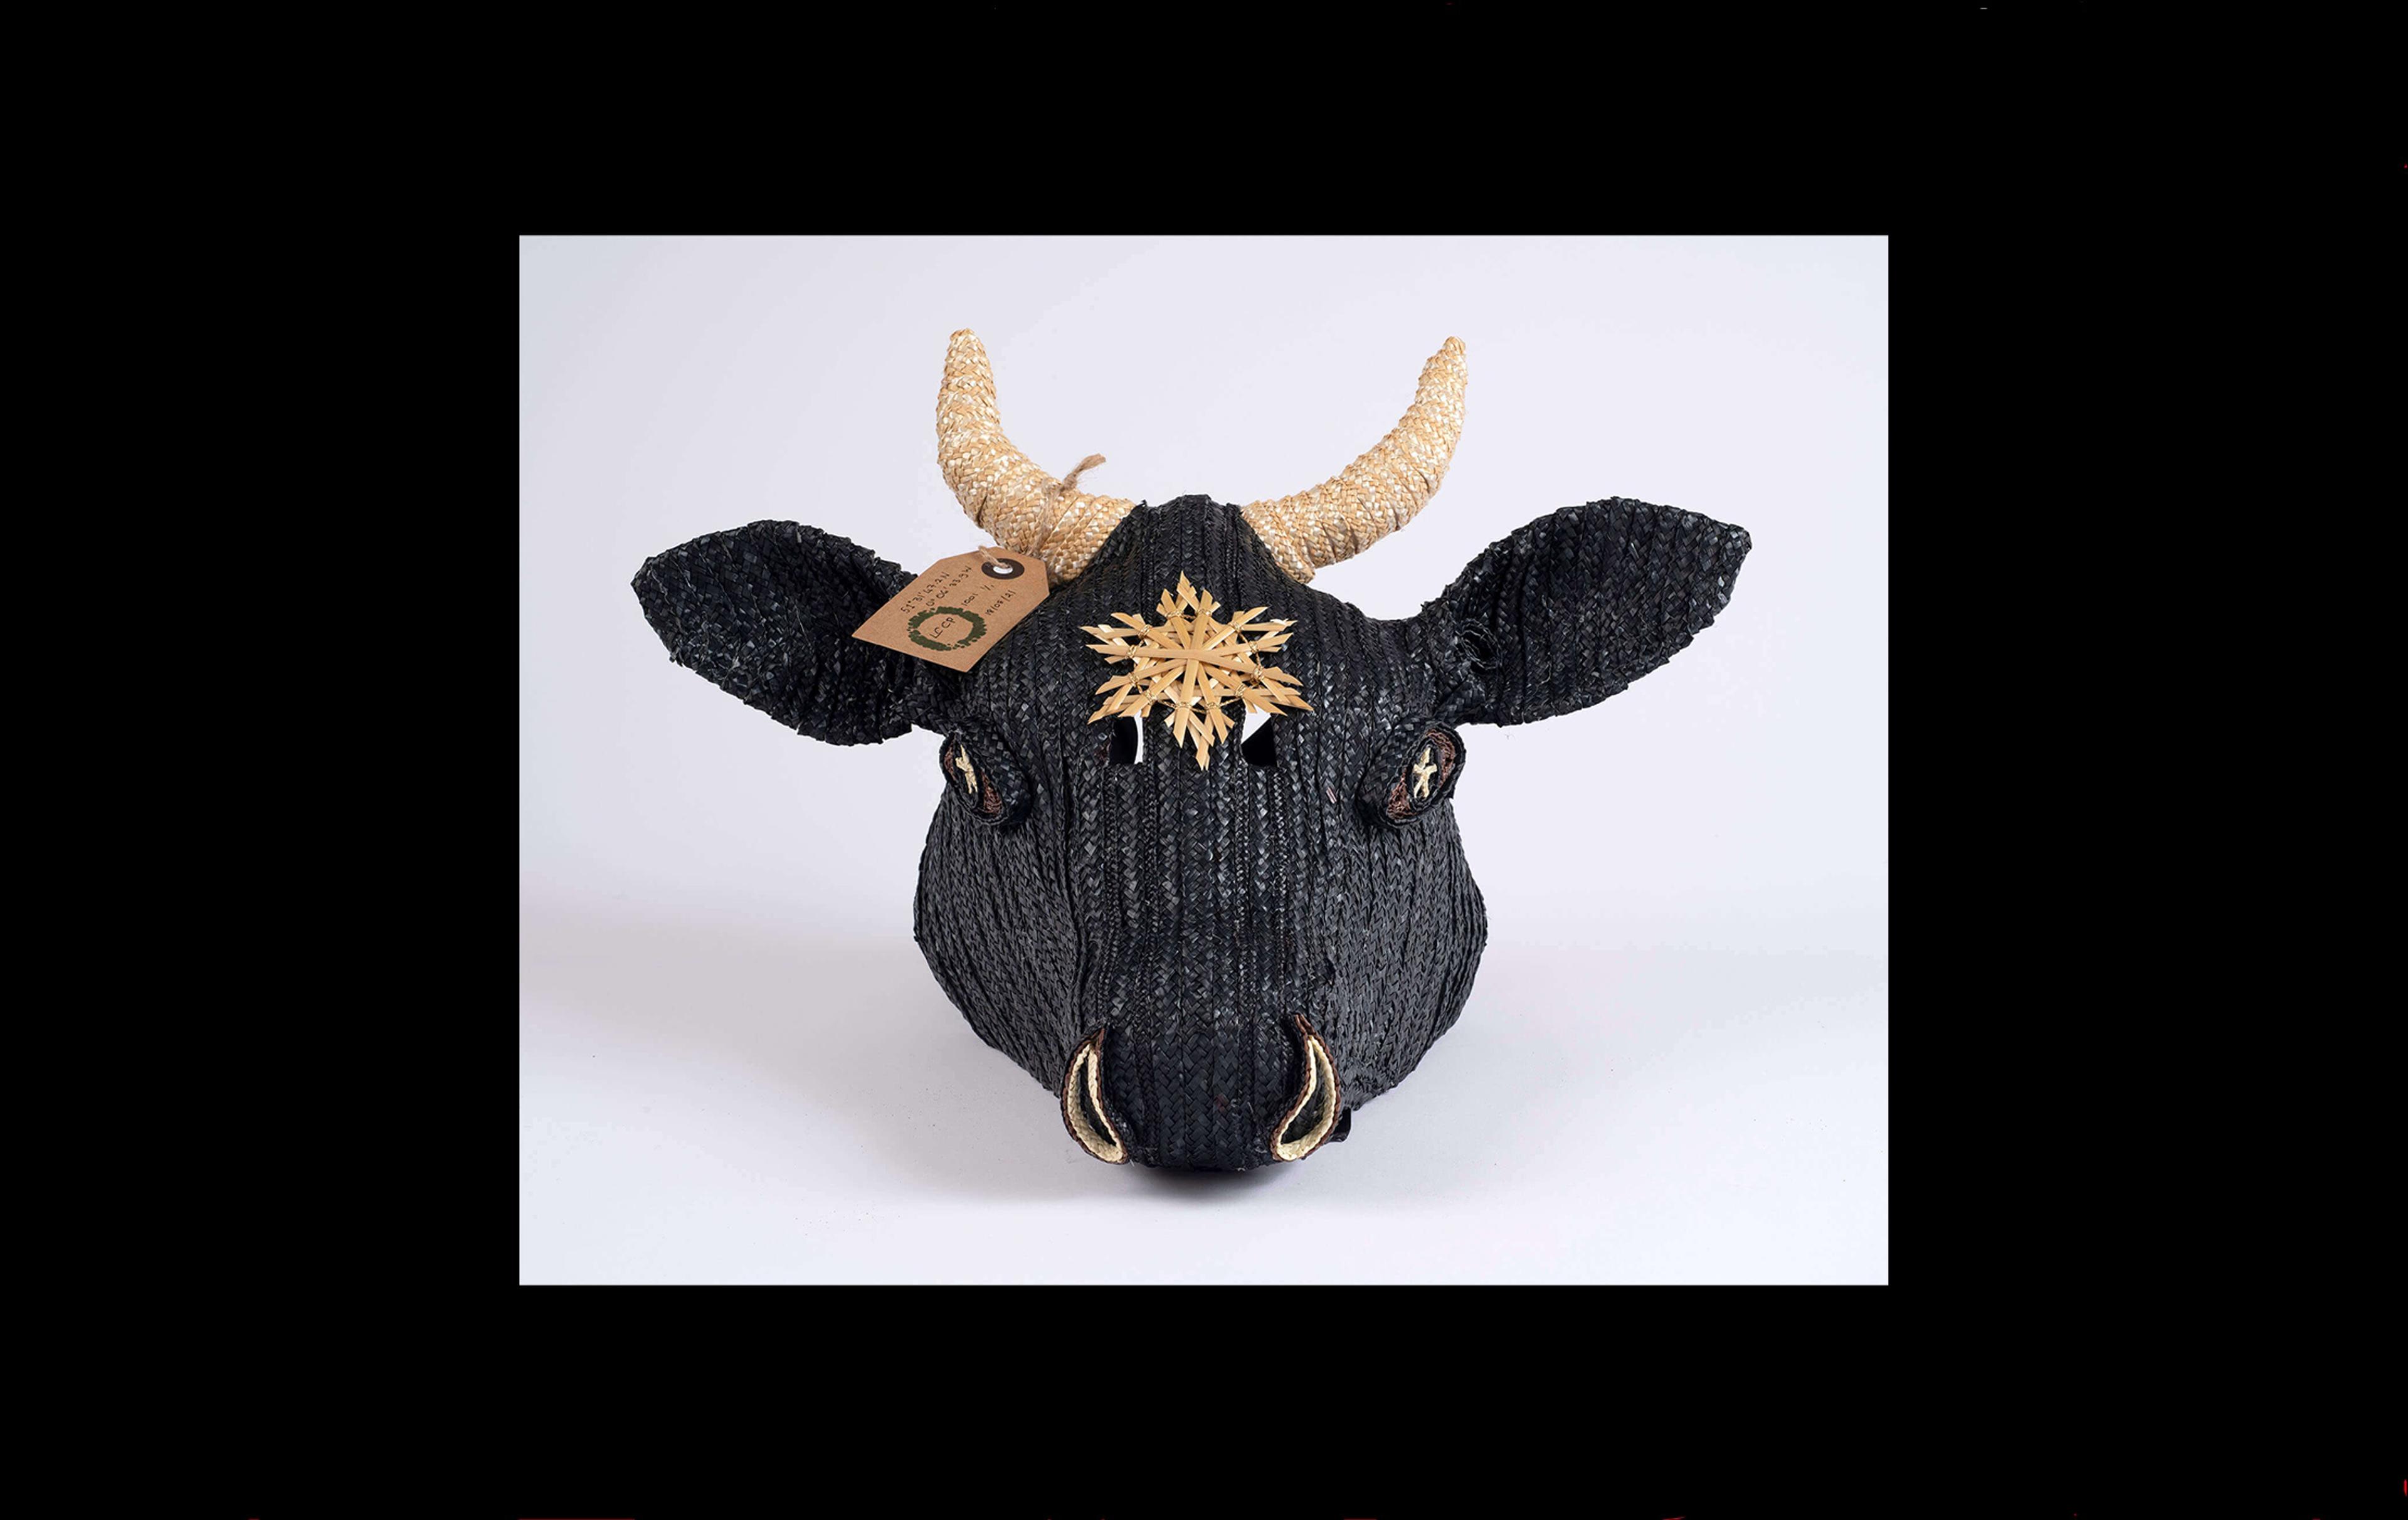 Photograph of a cow's head made with black straw and with a yellow straw woven star on its forehead